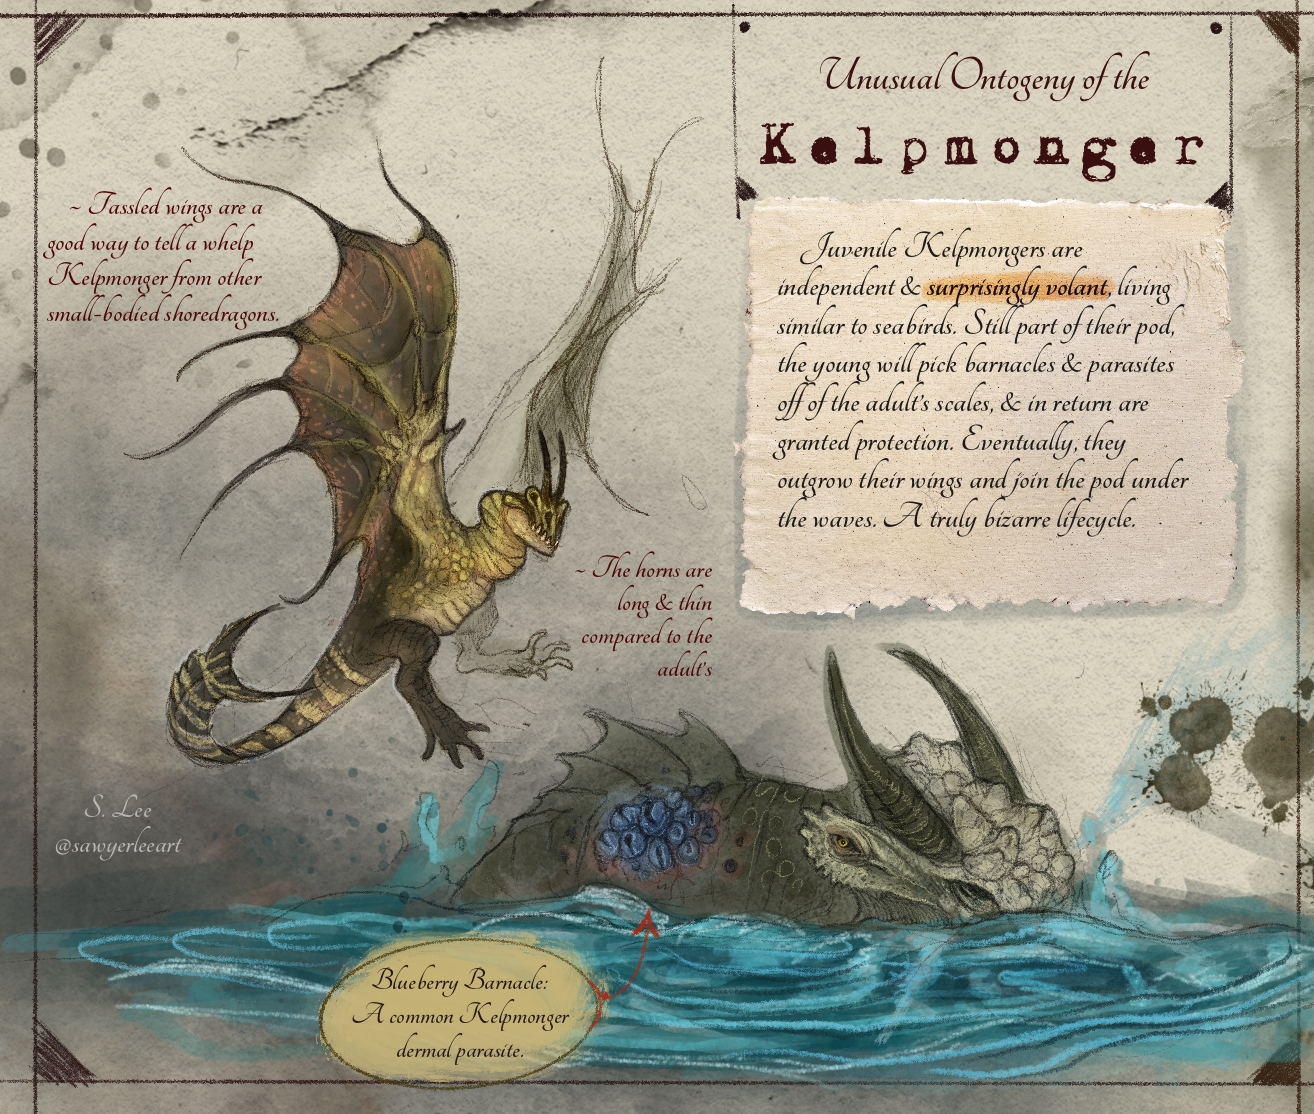 Dragonslayer codex page 1. (repost as I forgot a caption in the original) :  r/worldbuilding